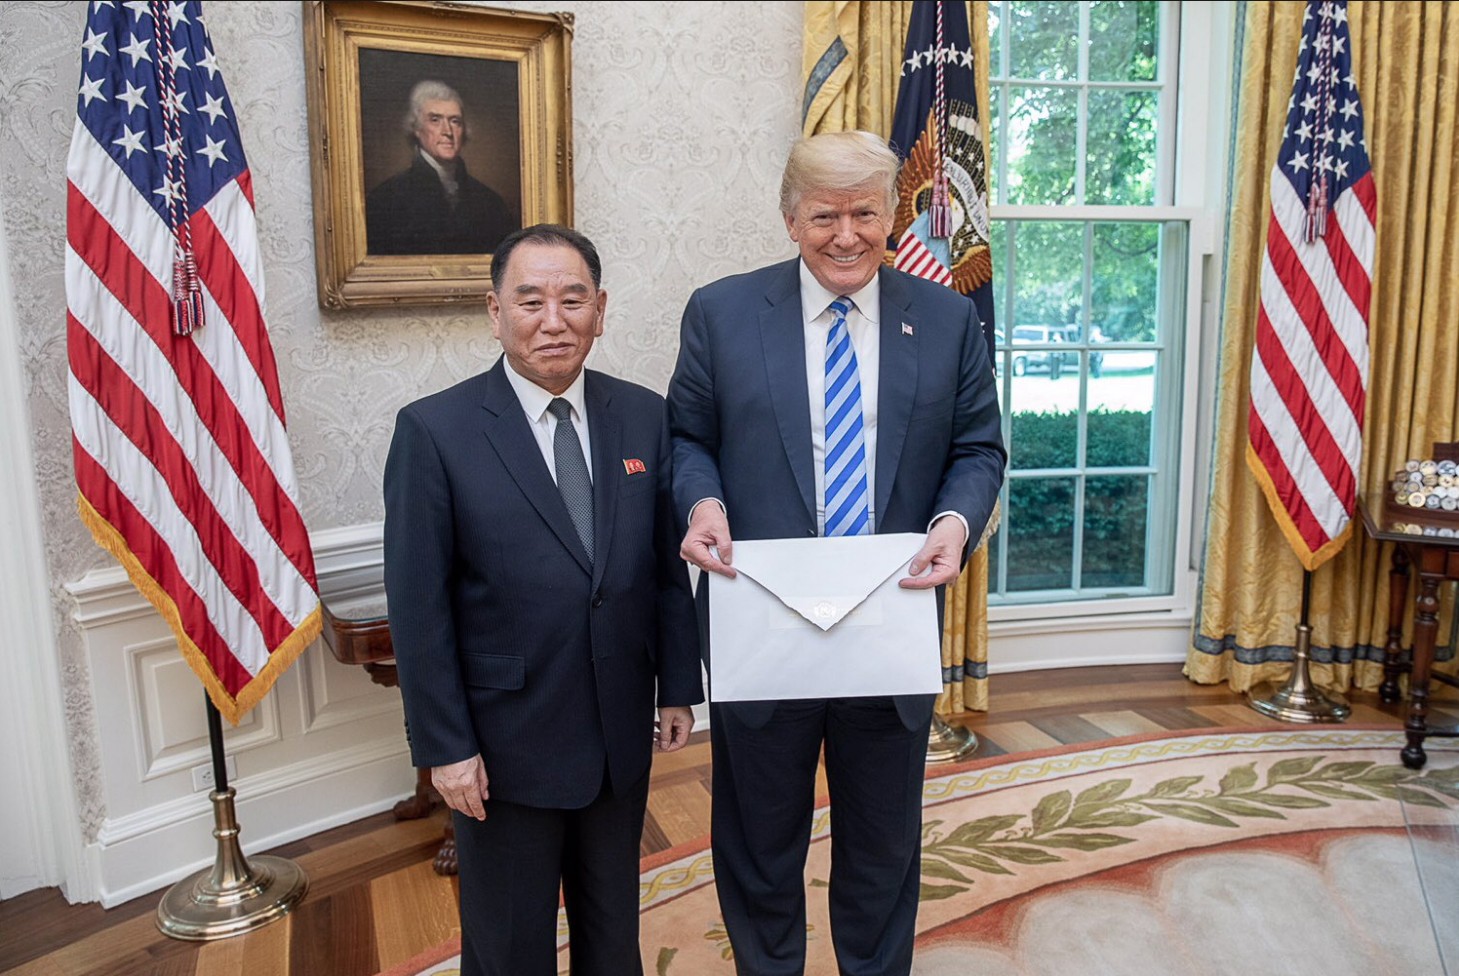 An open letter to the US president: keep your eyes on the prize (no, not the Nobel Peace one, the other one – building trust for the denuclearisation of the Korean peninsula). Oh, and try not to smile